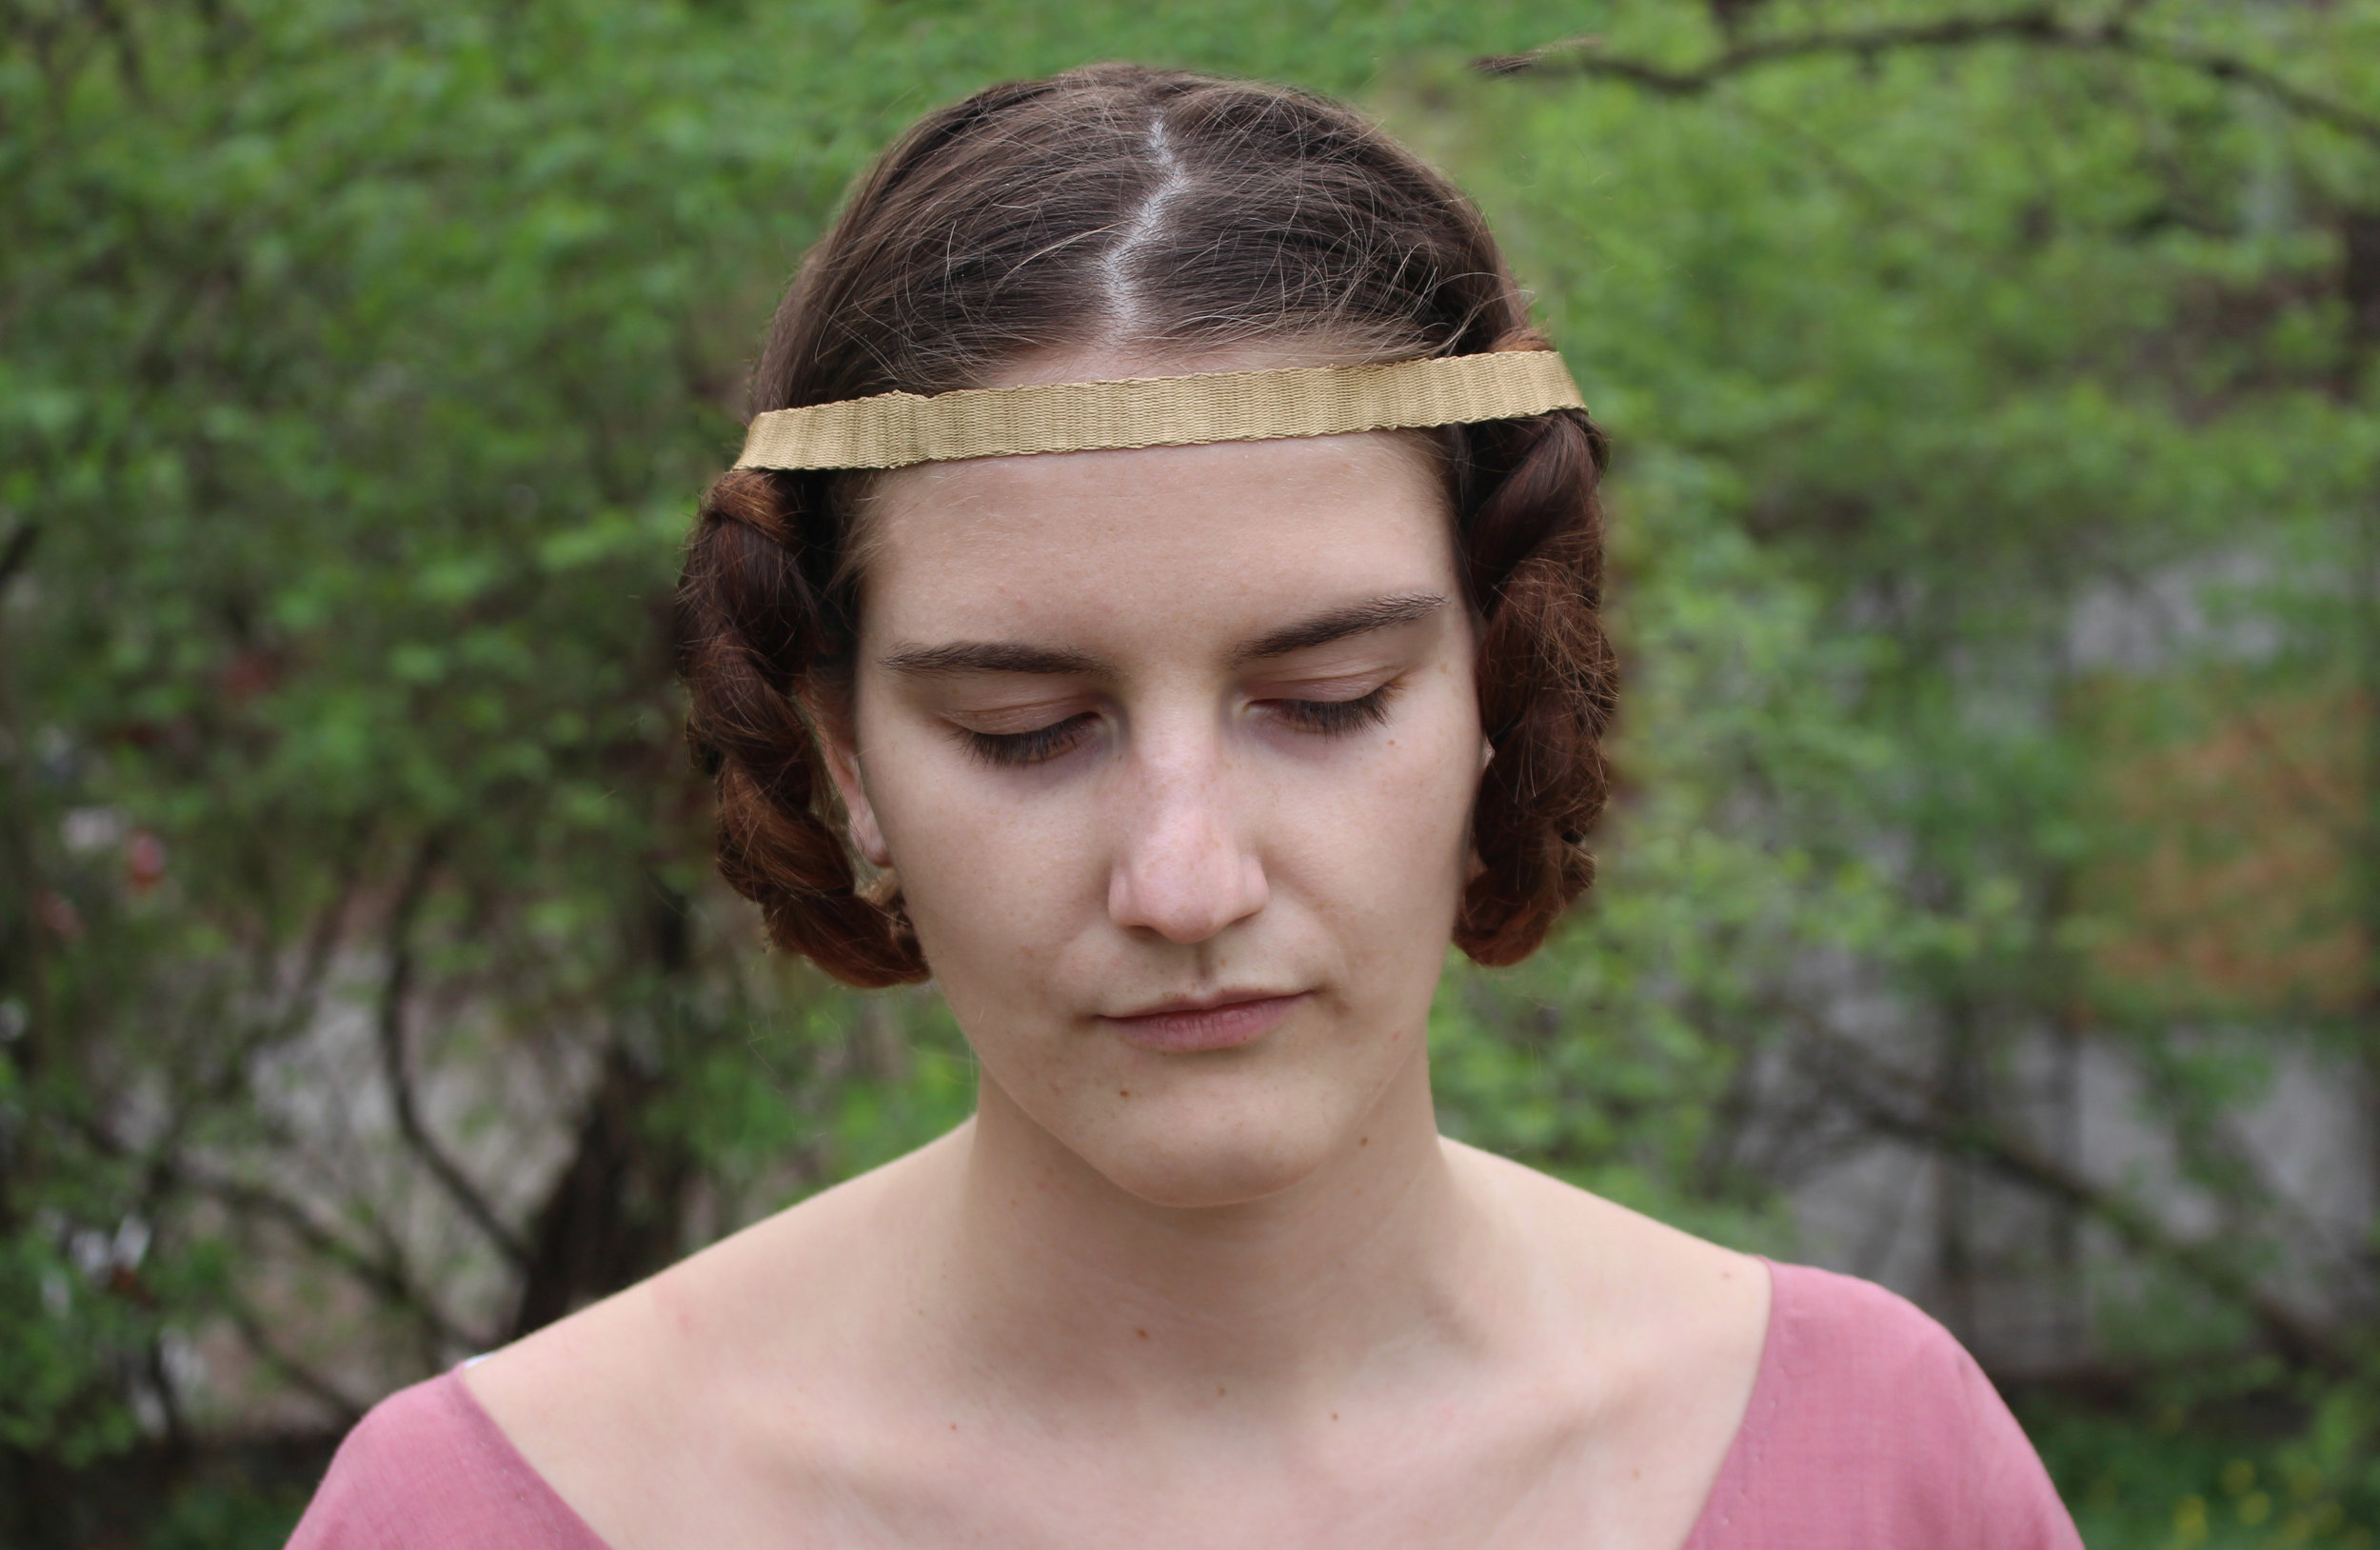  Silk headband woven on a period accurate band loom. 